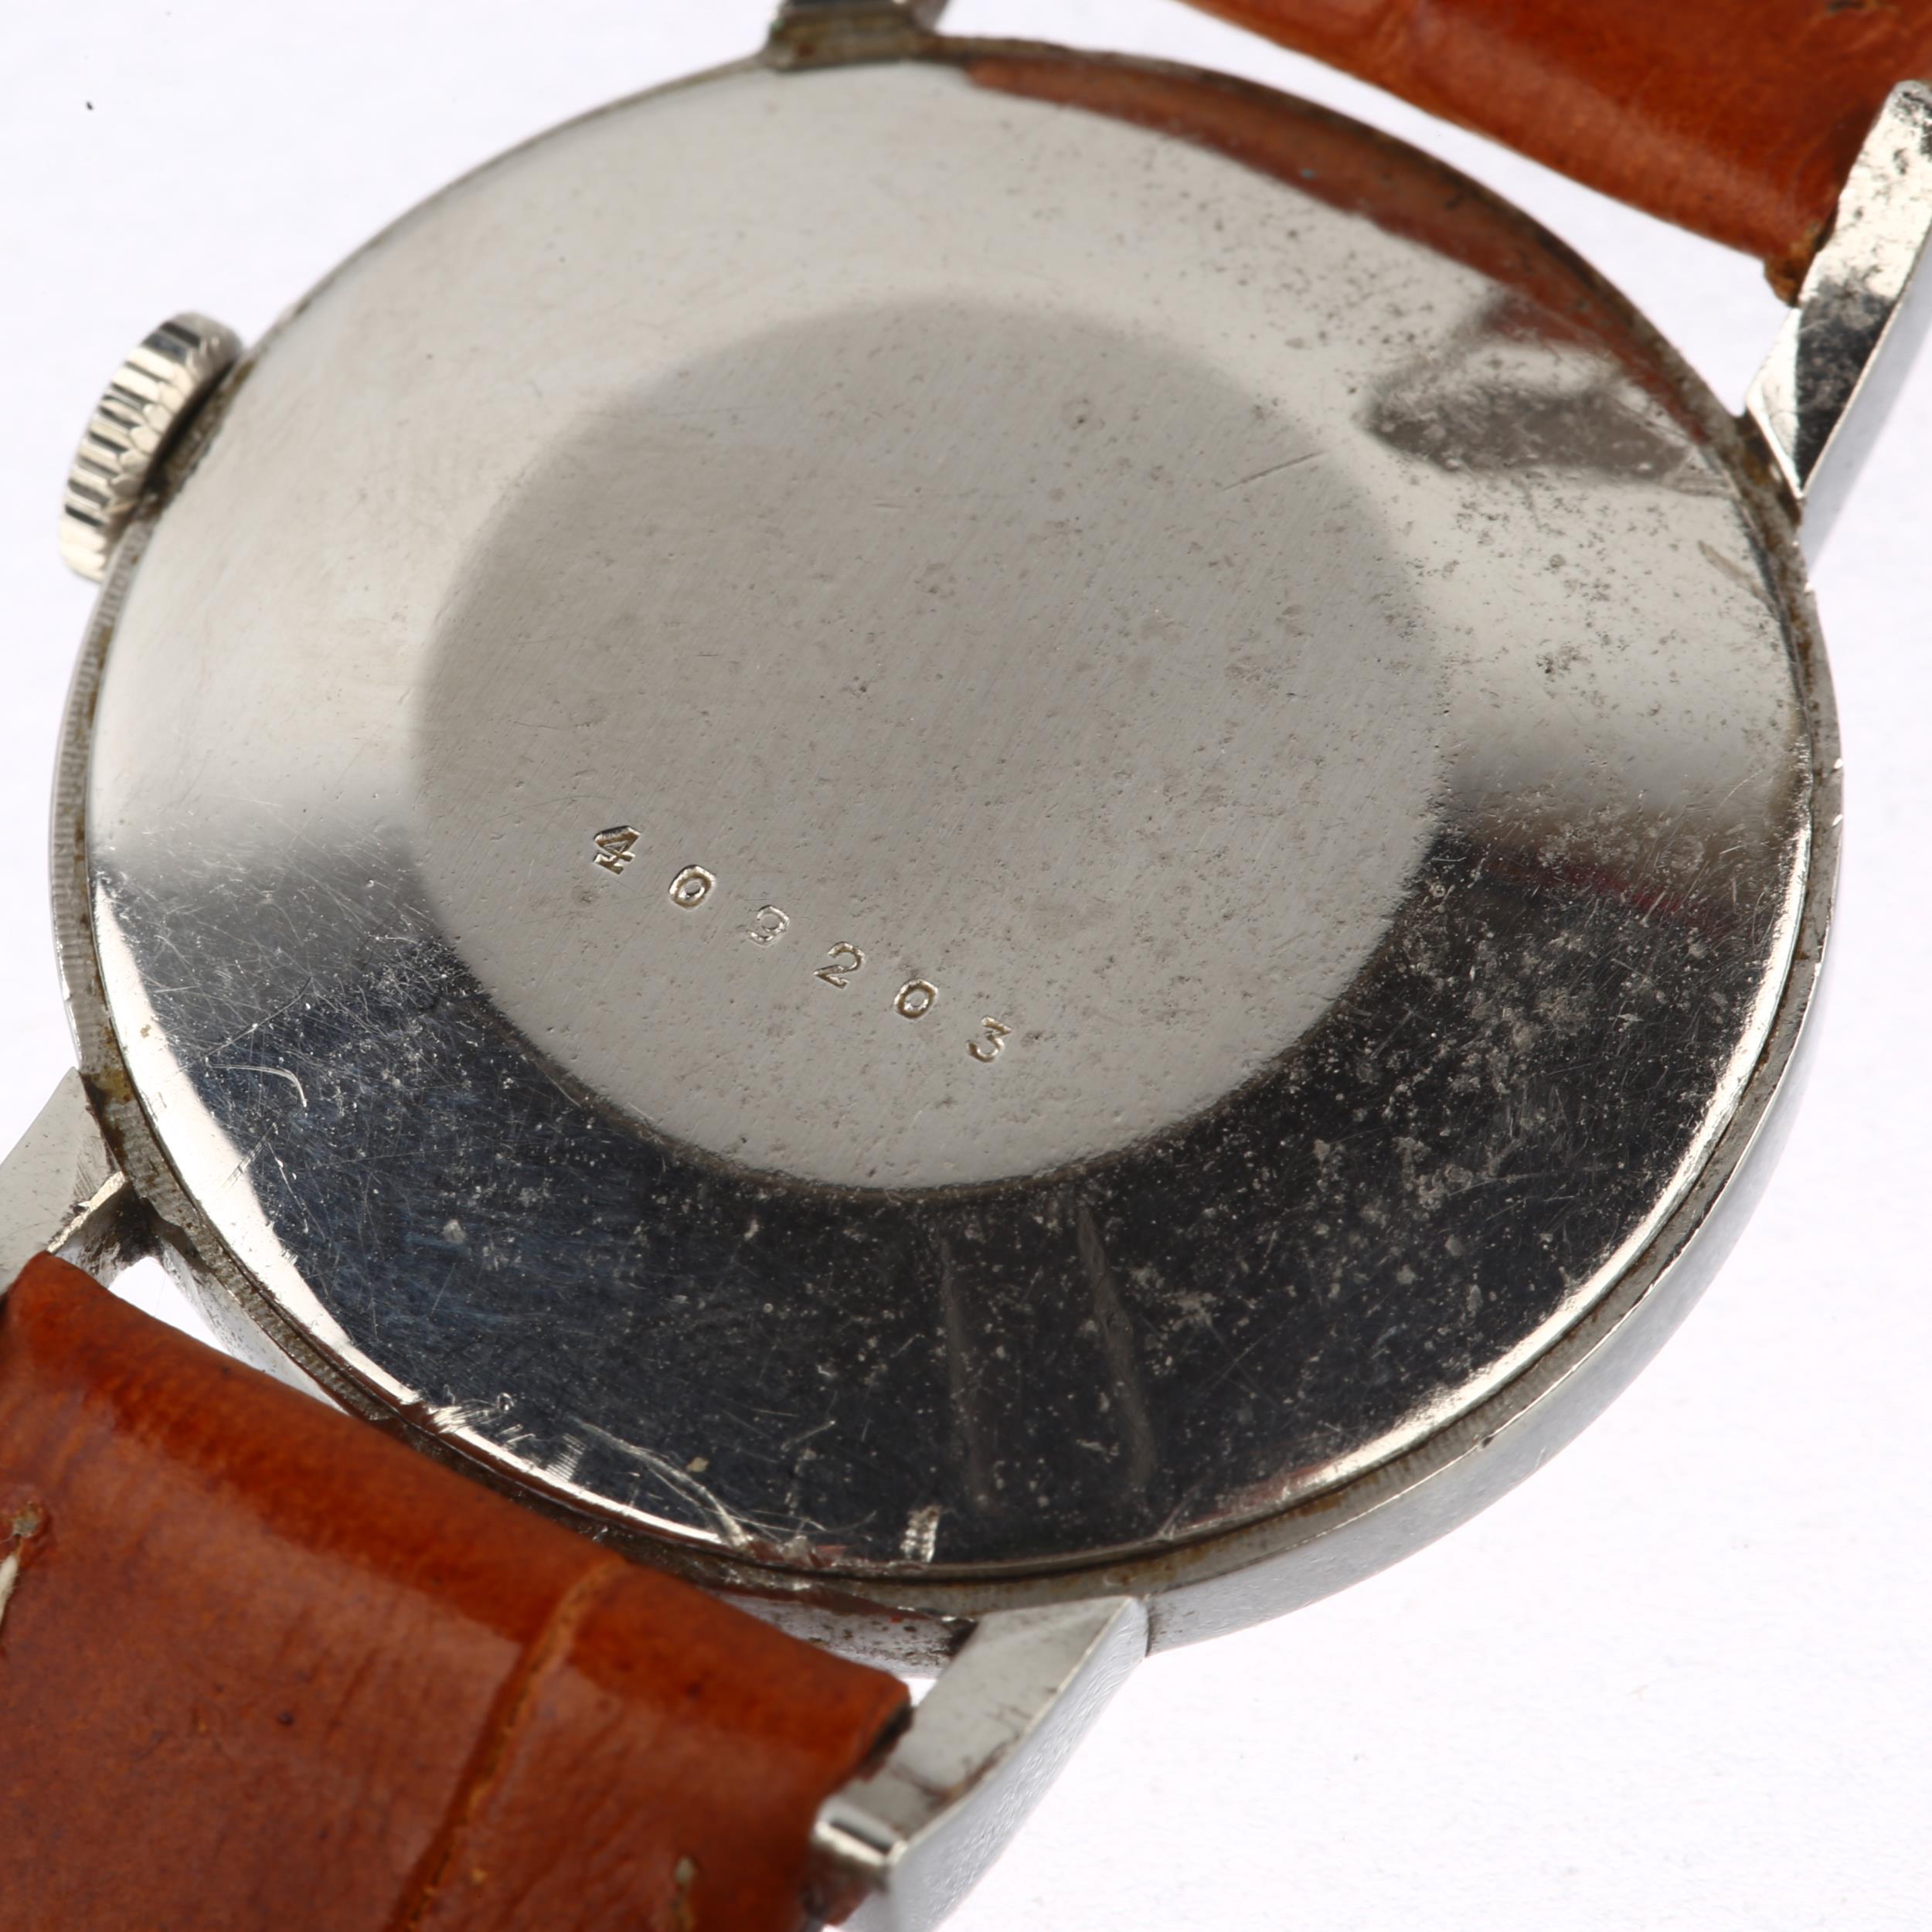 JAEGER LECOULTRE - a Vintage stainless steel mechanical wristwatch, circa 1950s, silvered dial - Image 4 of 5